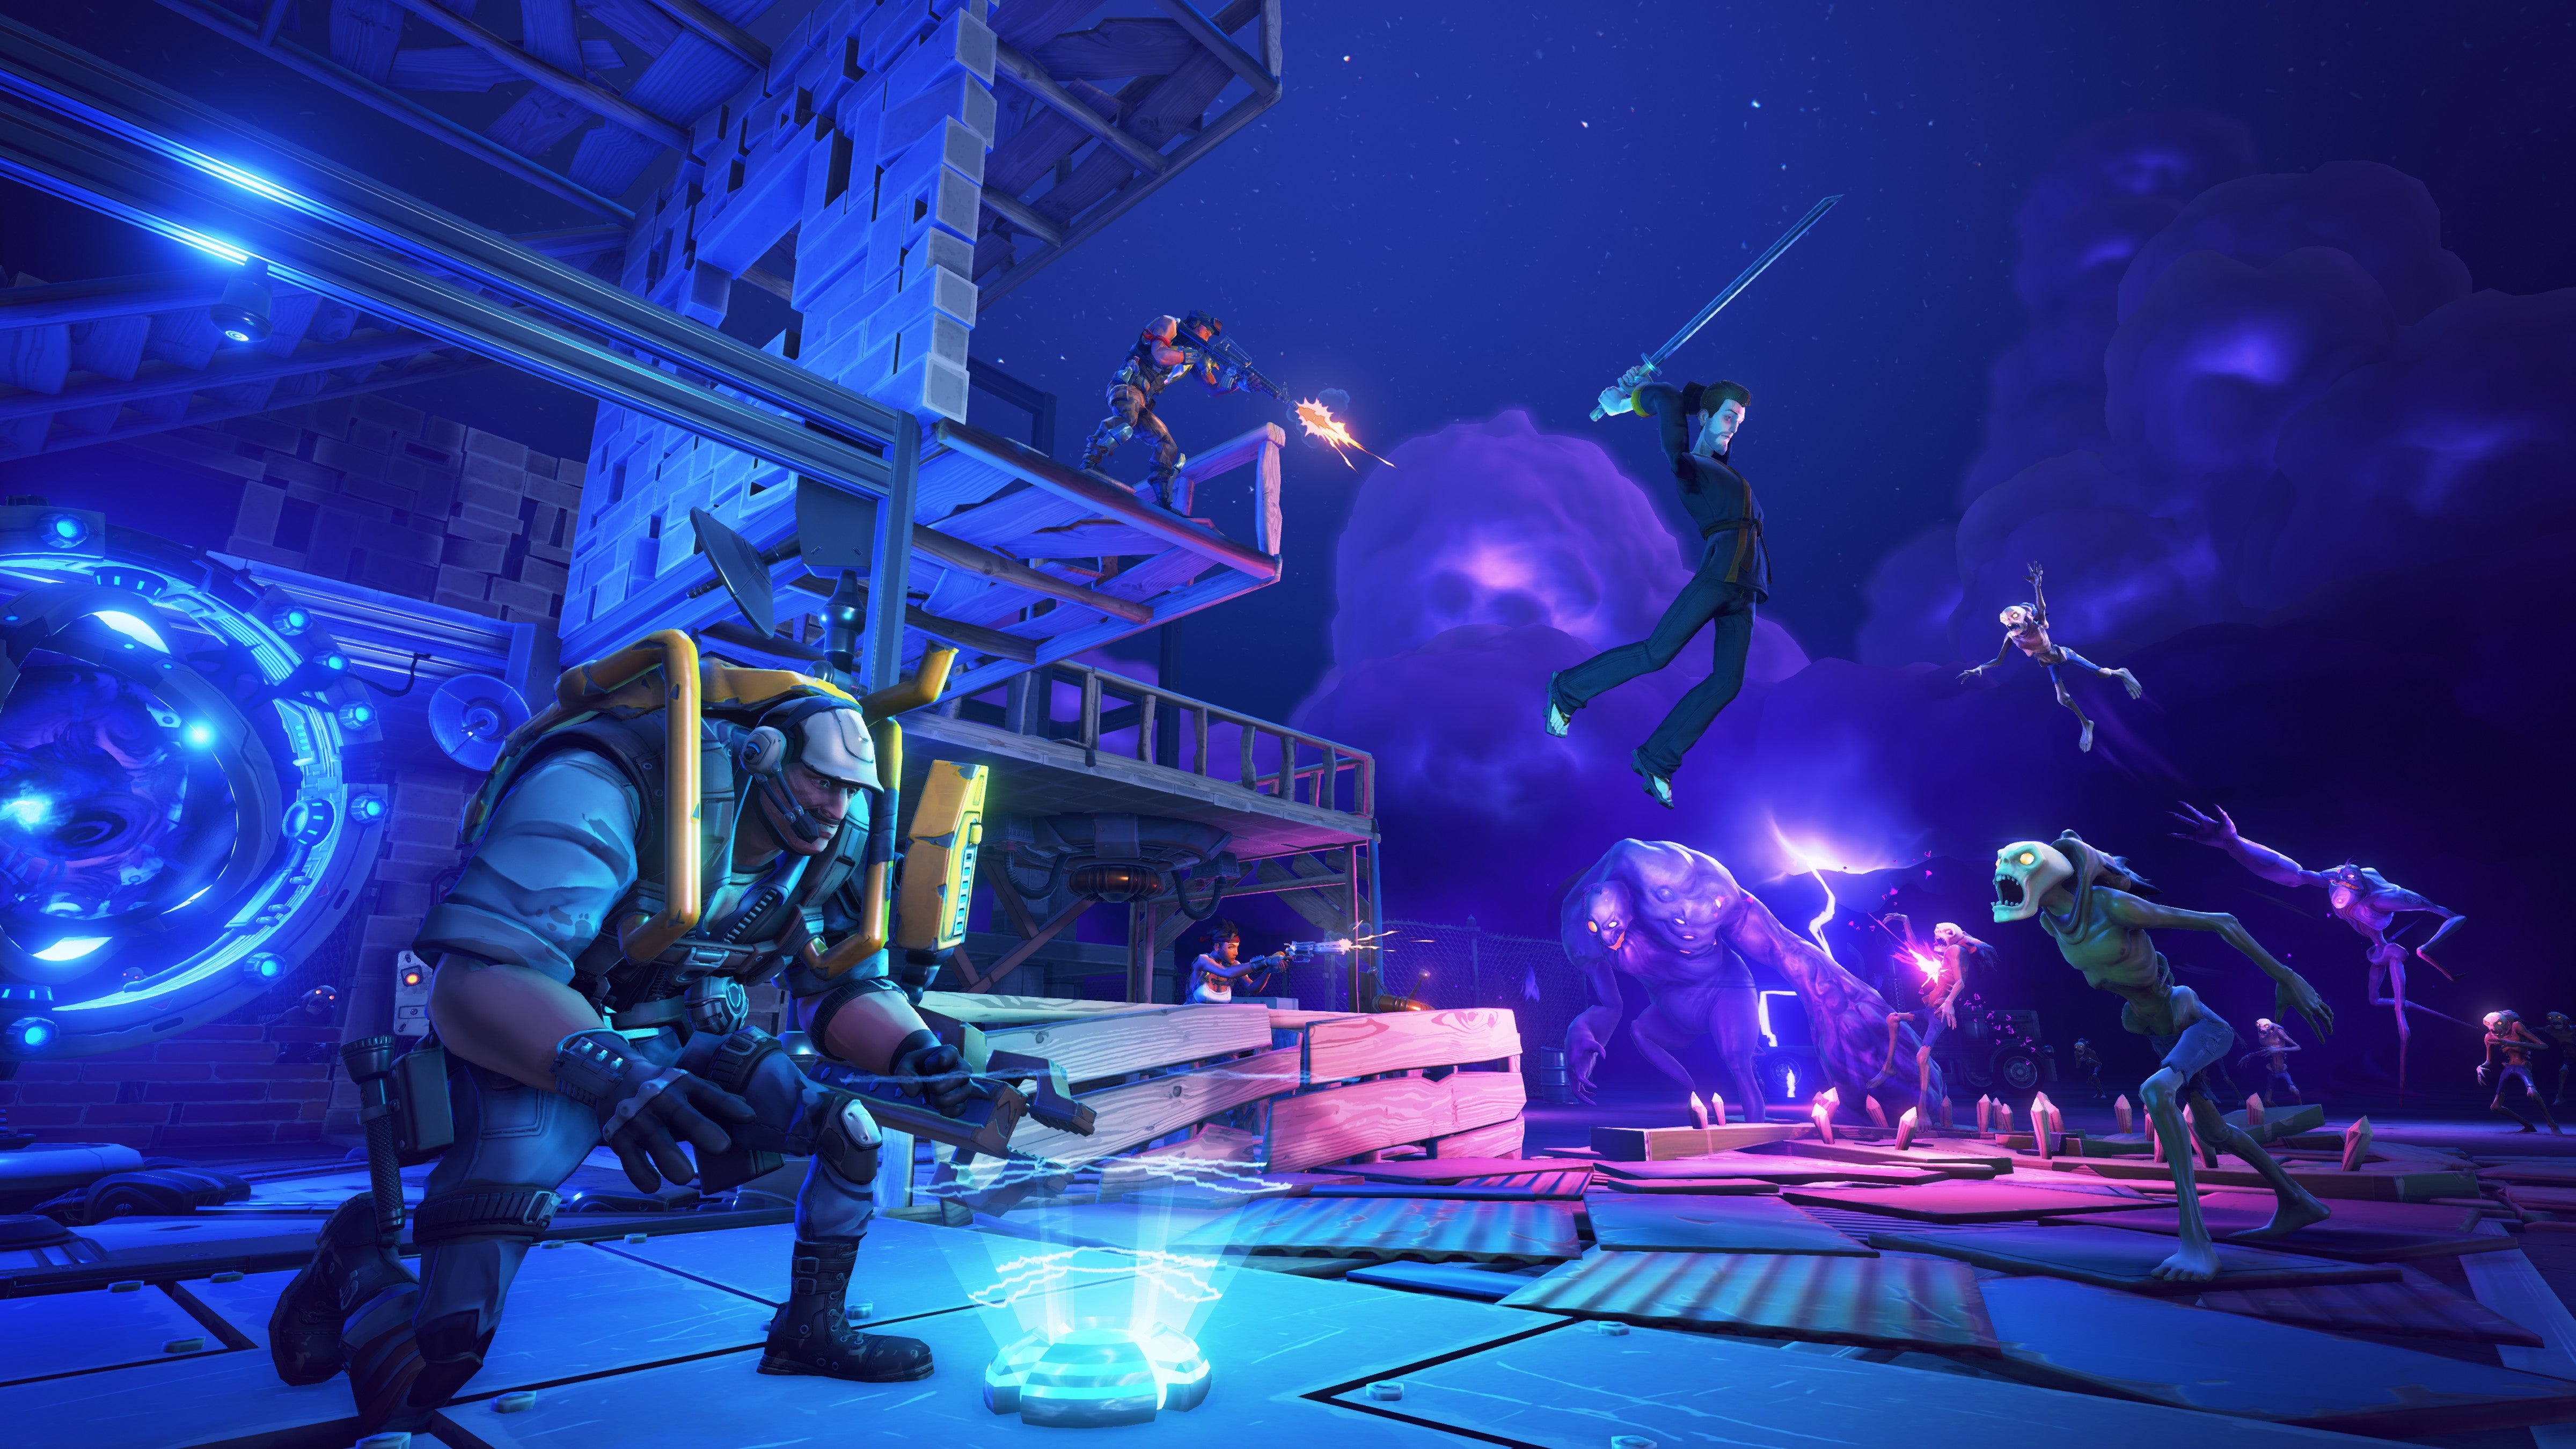 Fortnite Is Not What You'd Expect From The Makers Of Gears ... - 4800 x 2700 jpeg 1758kB